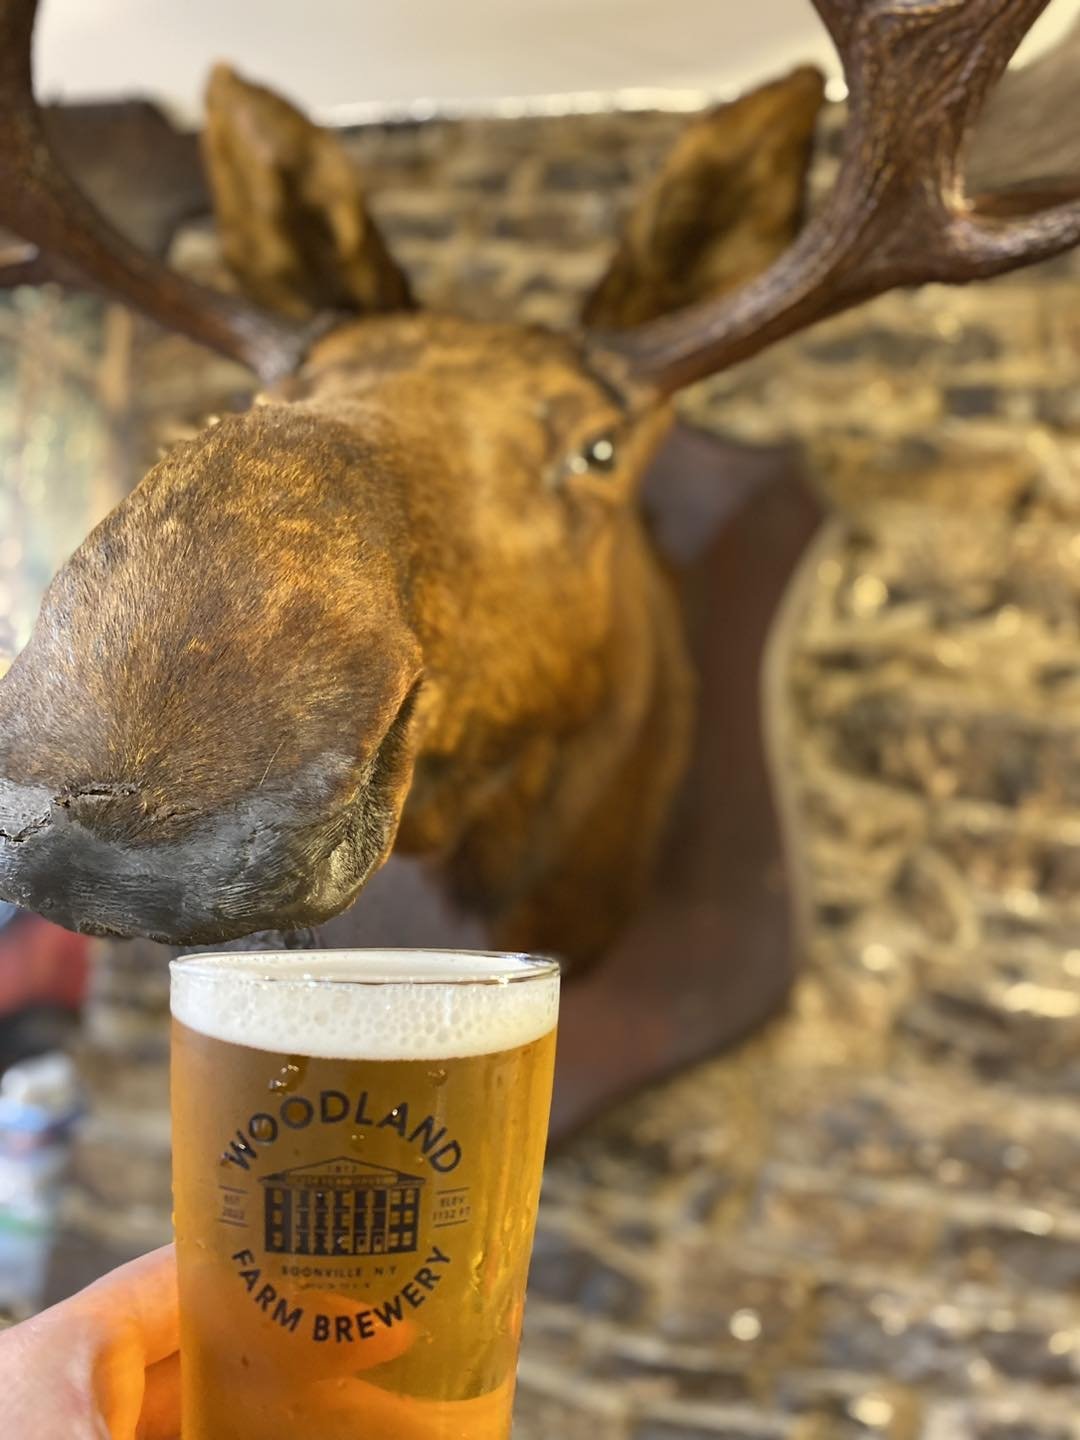 A moose seems to enjoy a cold one at the Woodland Brewery’s newest venue at the historic Hulbert House in Boonville.